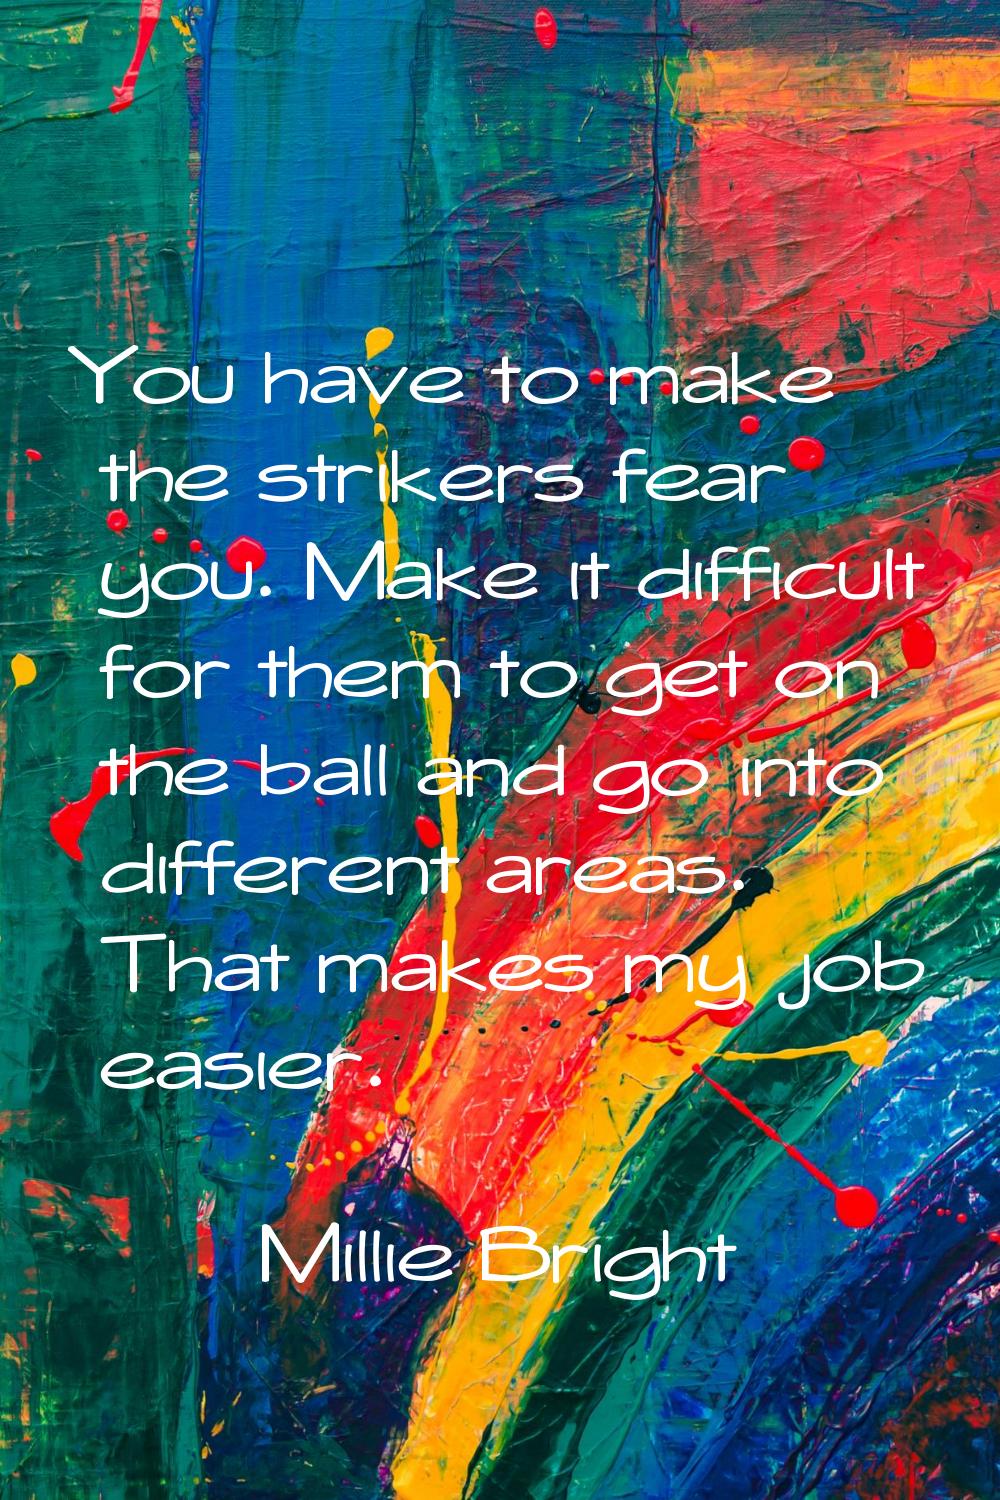 You have to make the strikers fear you. Make it difficult for them to get on the ball and go into d